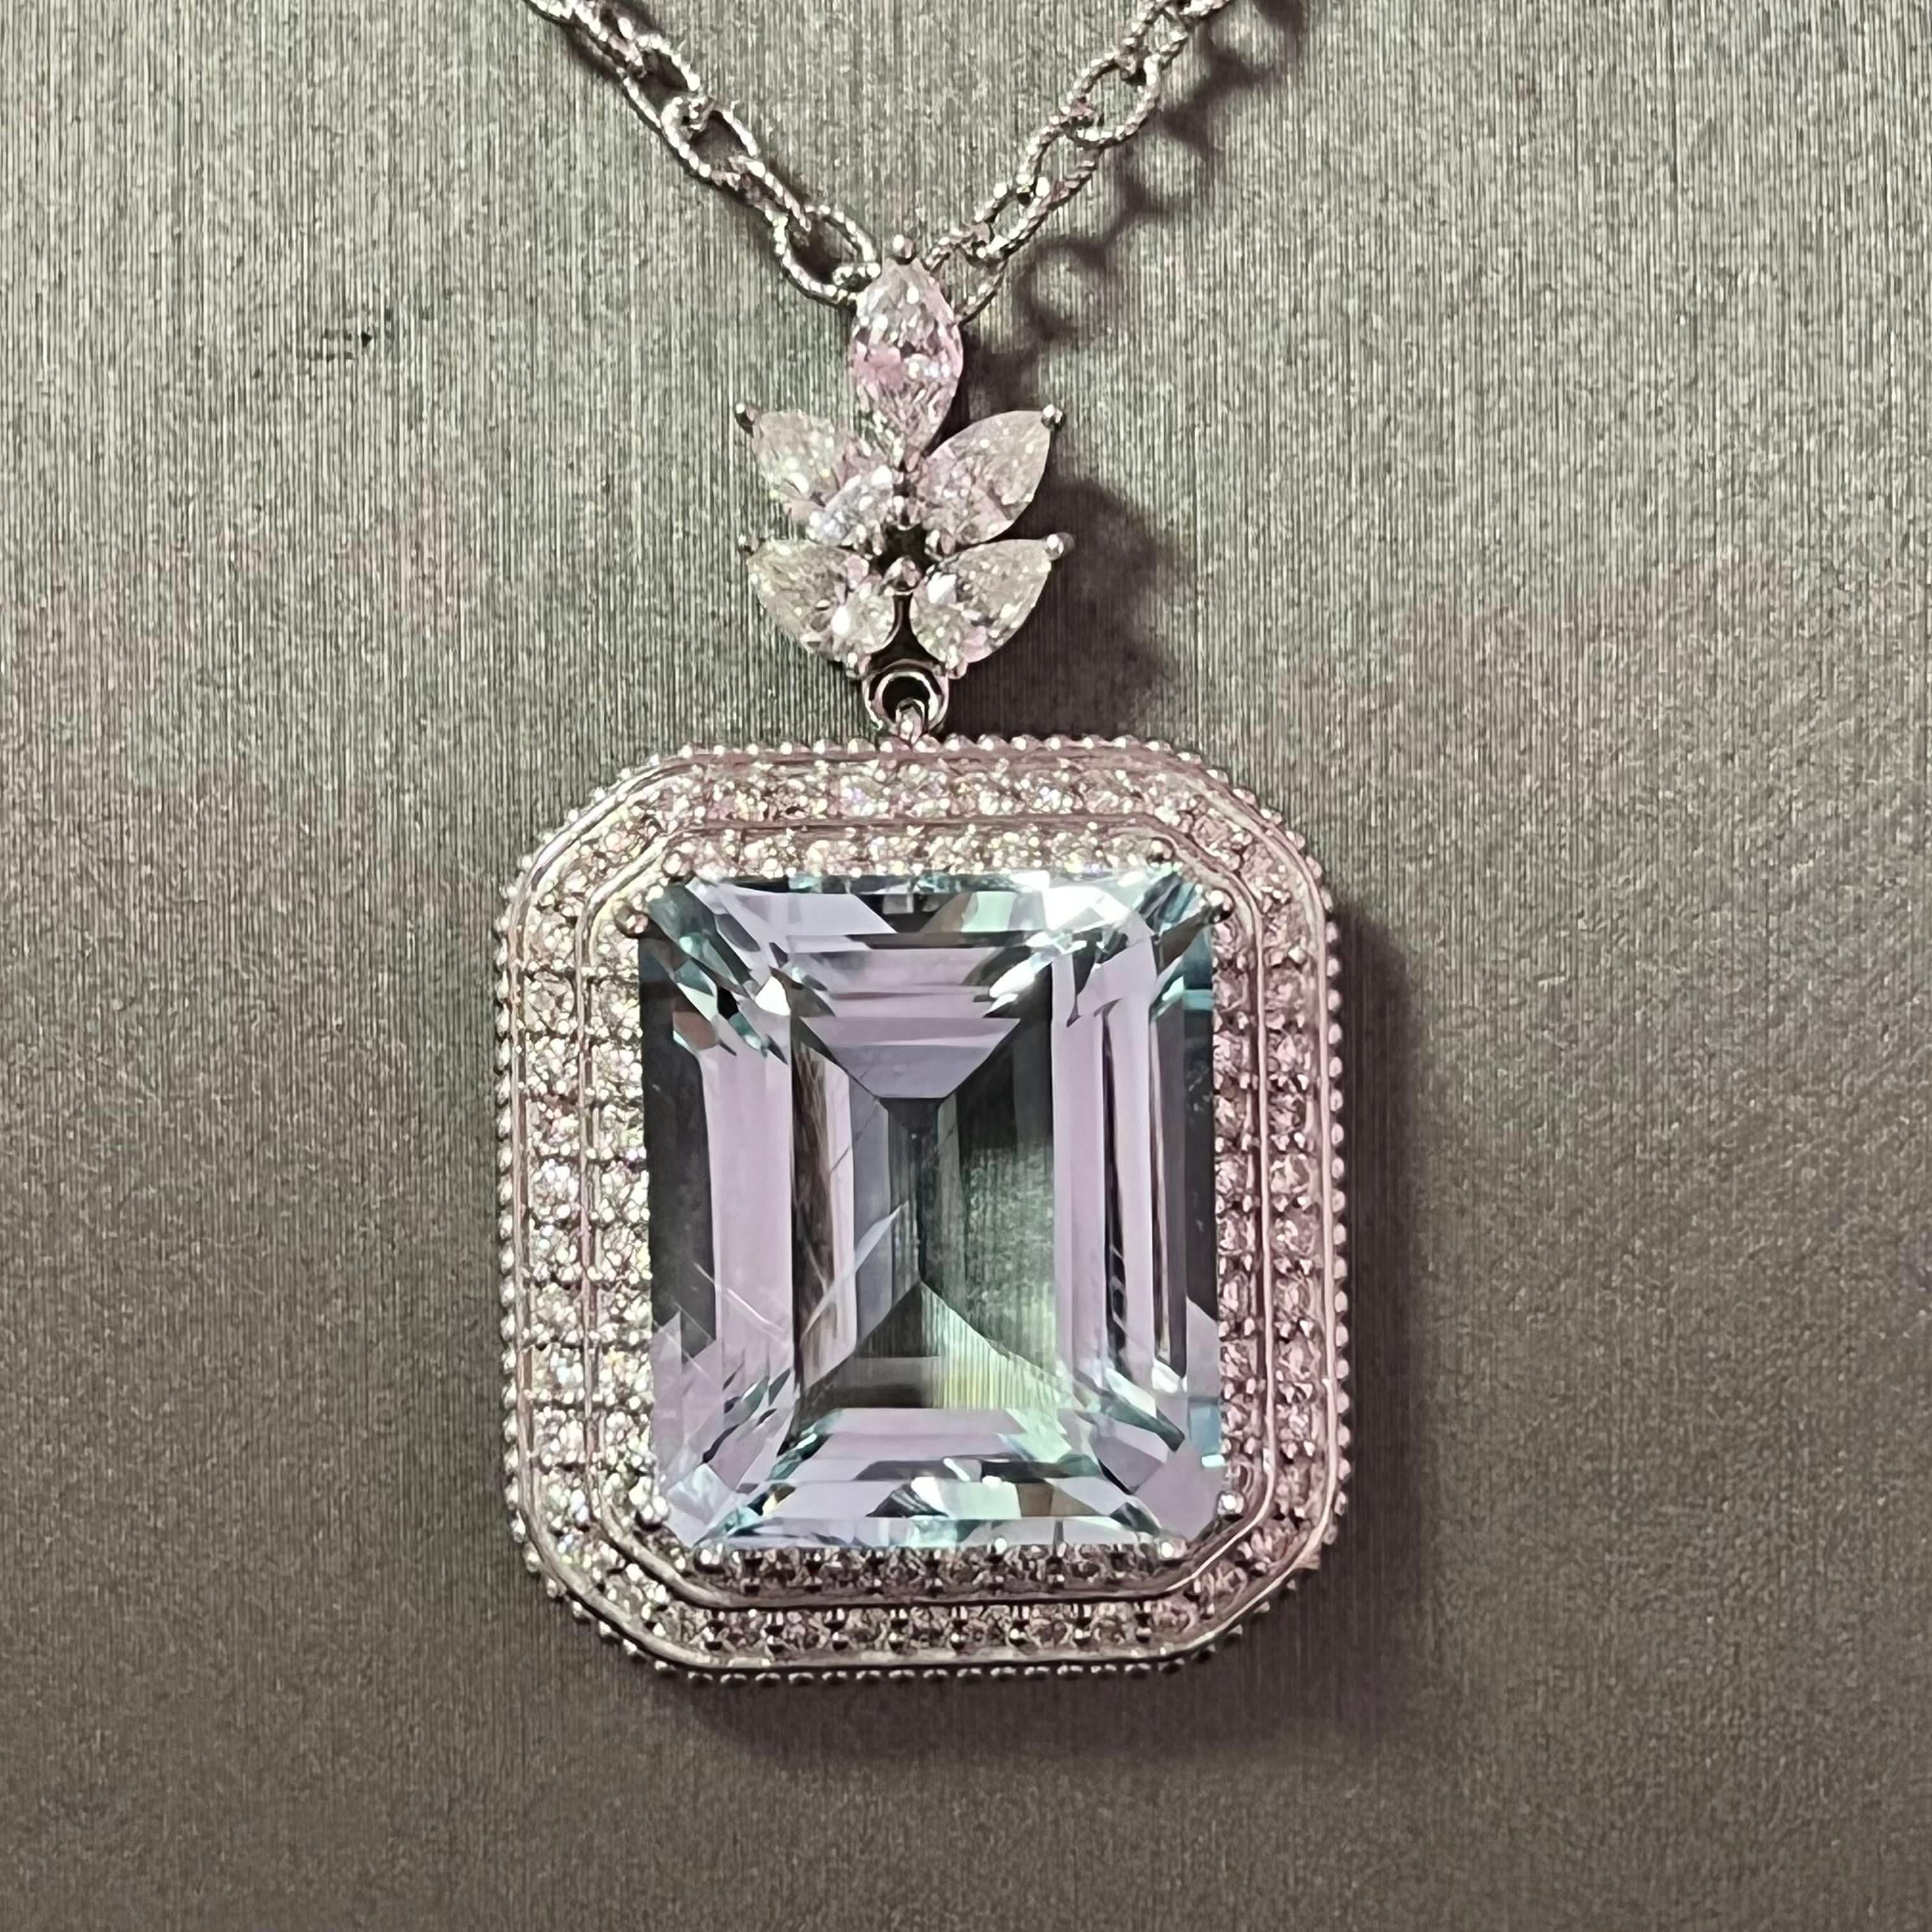 Natural Aquamarine Diamond Gold Necklace 27 TCW GIA Certified $16, 475 121172 For Sale 3